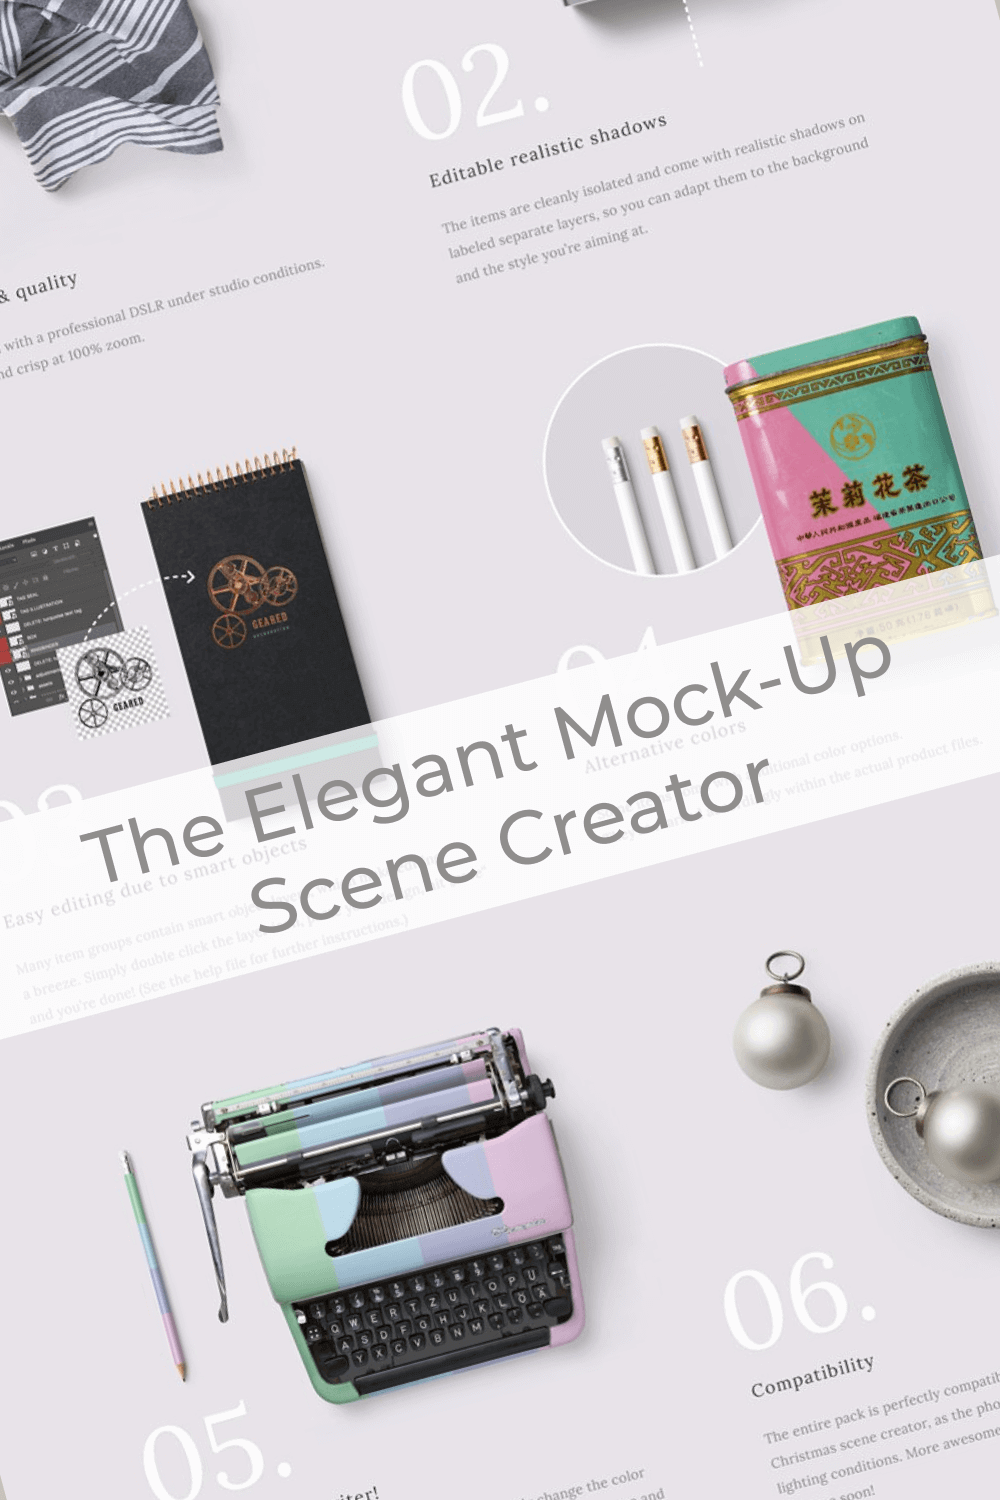 The Elegant Mock-Up Scene Creator is Compatibility, Quality and Editable Realistic Shadows.